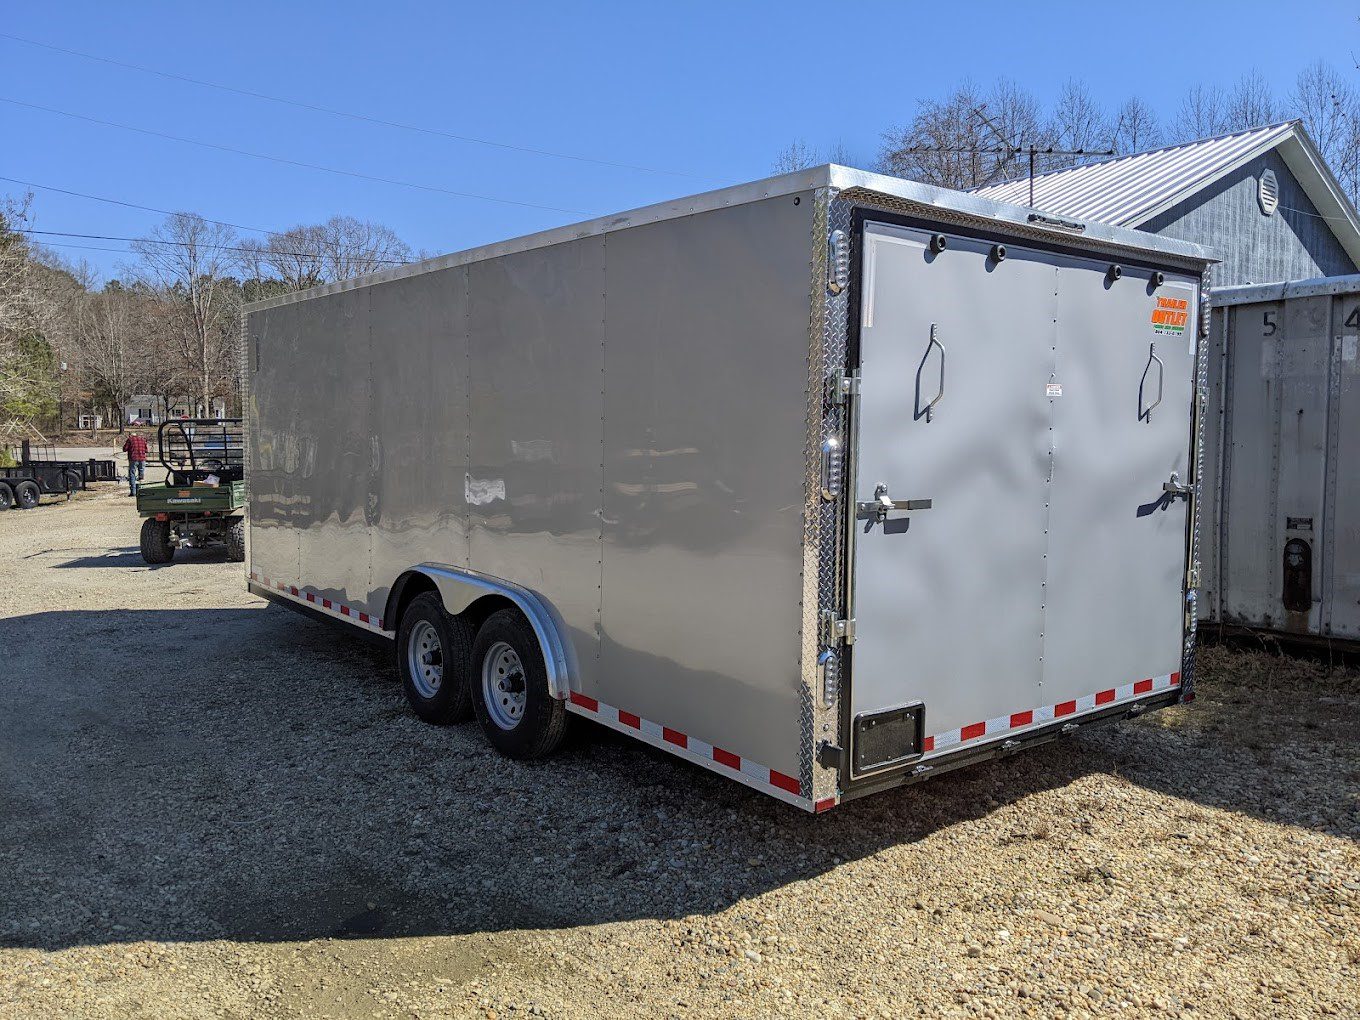 The Advantages of Enclosed Trailers vs. Open Trailers